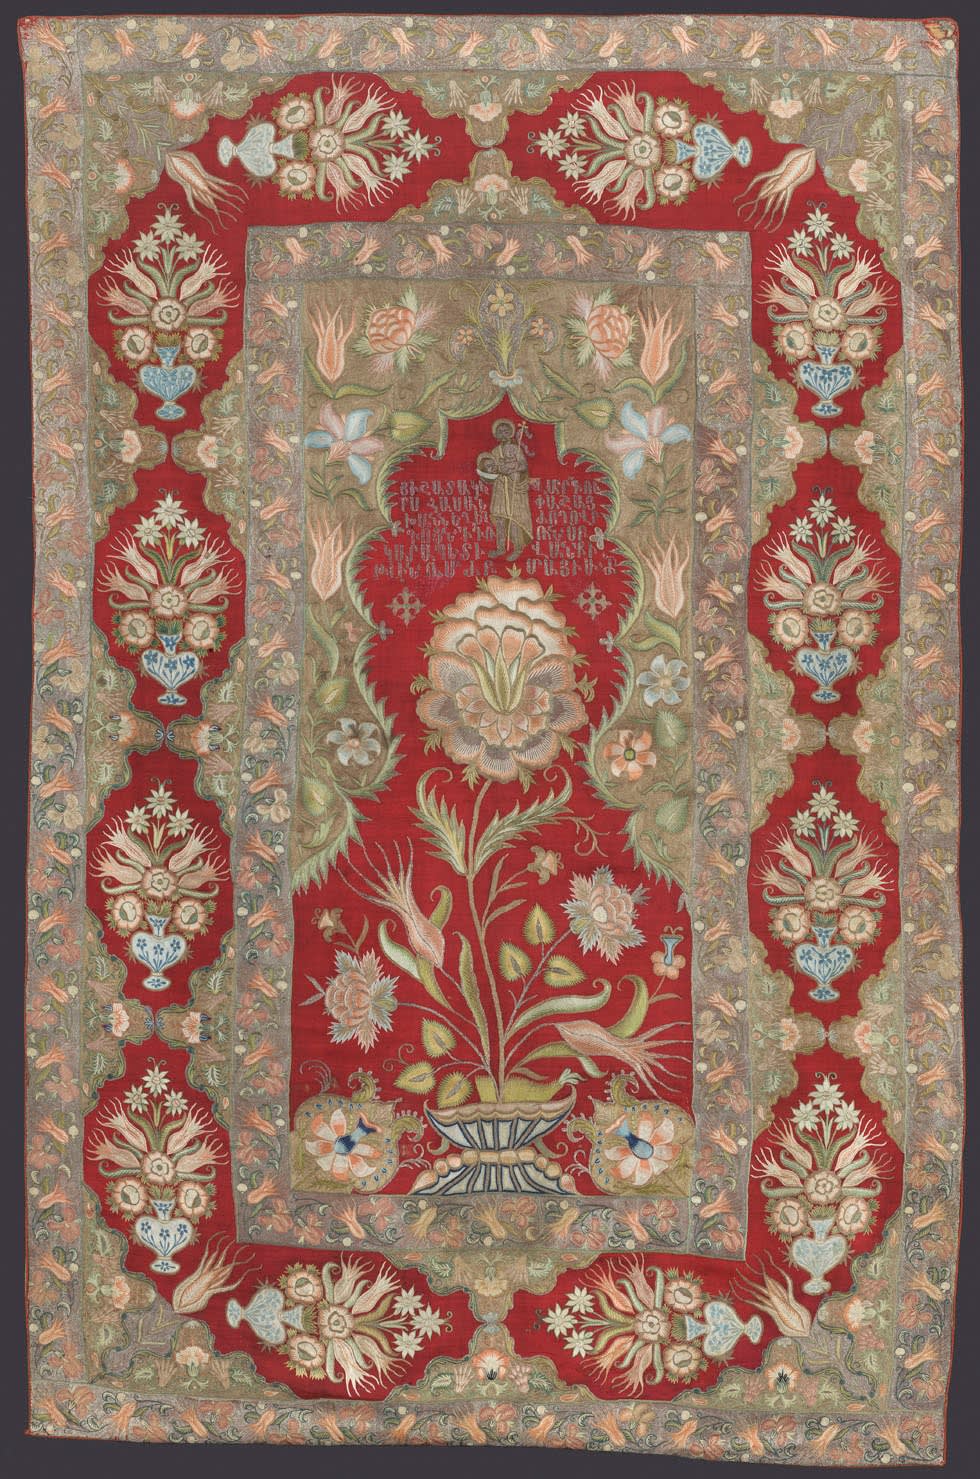 Armenian Liturgical Embroidery, Commissioned by the Armenian Community from Hassan Pasha District in Istanbul for the Monastery of Saint John the Baptist in 1763, Ottoman, Armenian commission executed in Istanbul, mid 18th century